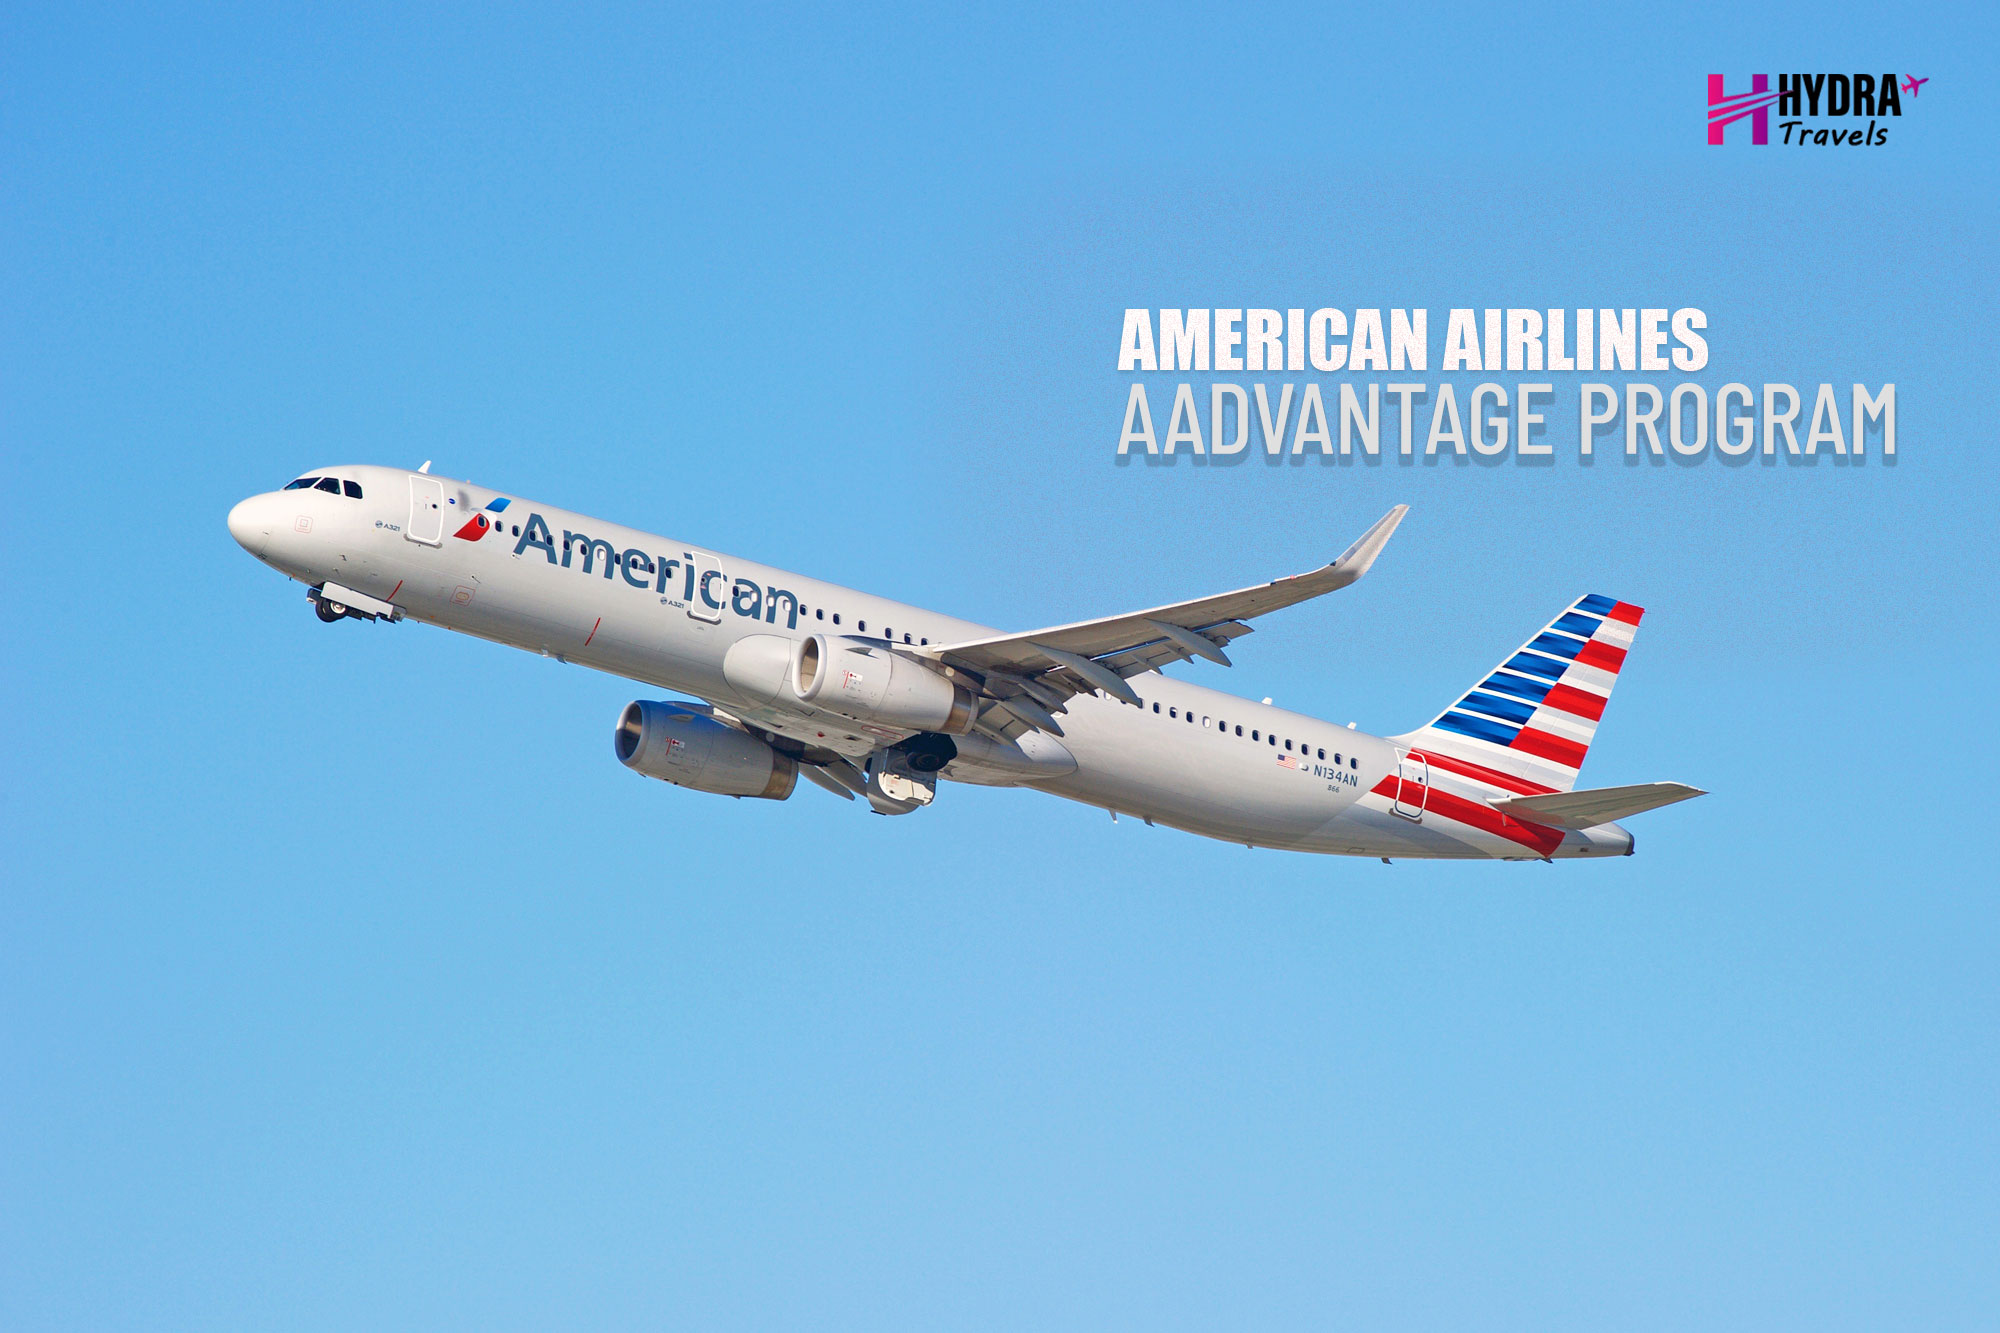 American Airlines AAdvantage Program: Know How To Earn and Redeem Miles